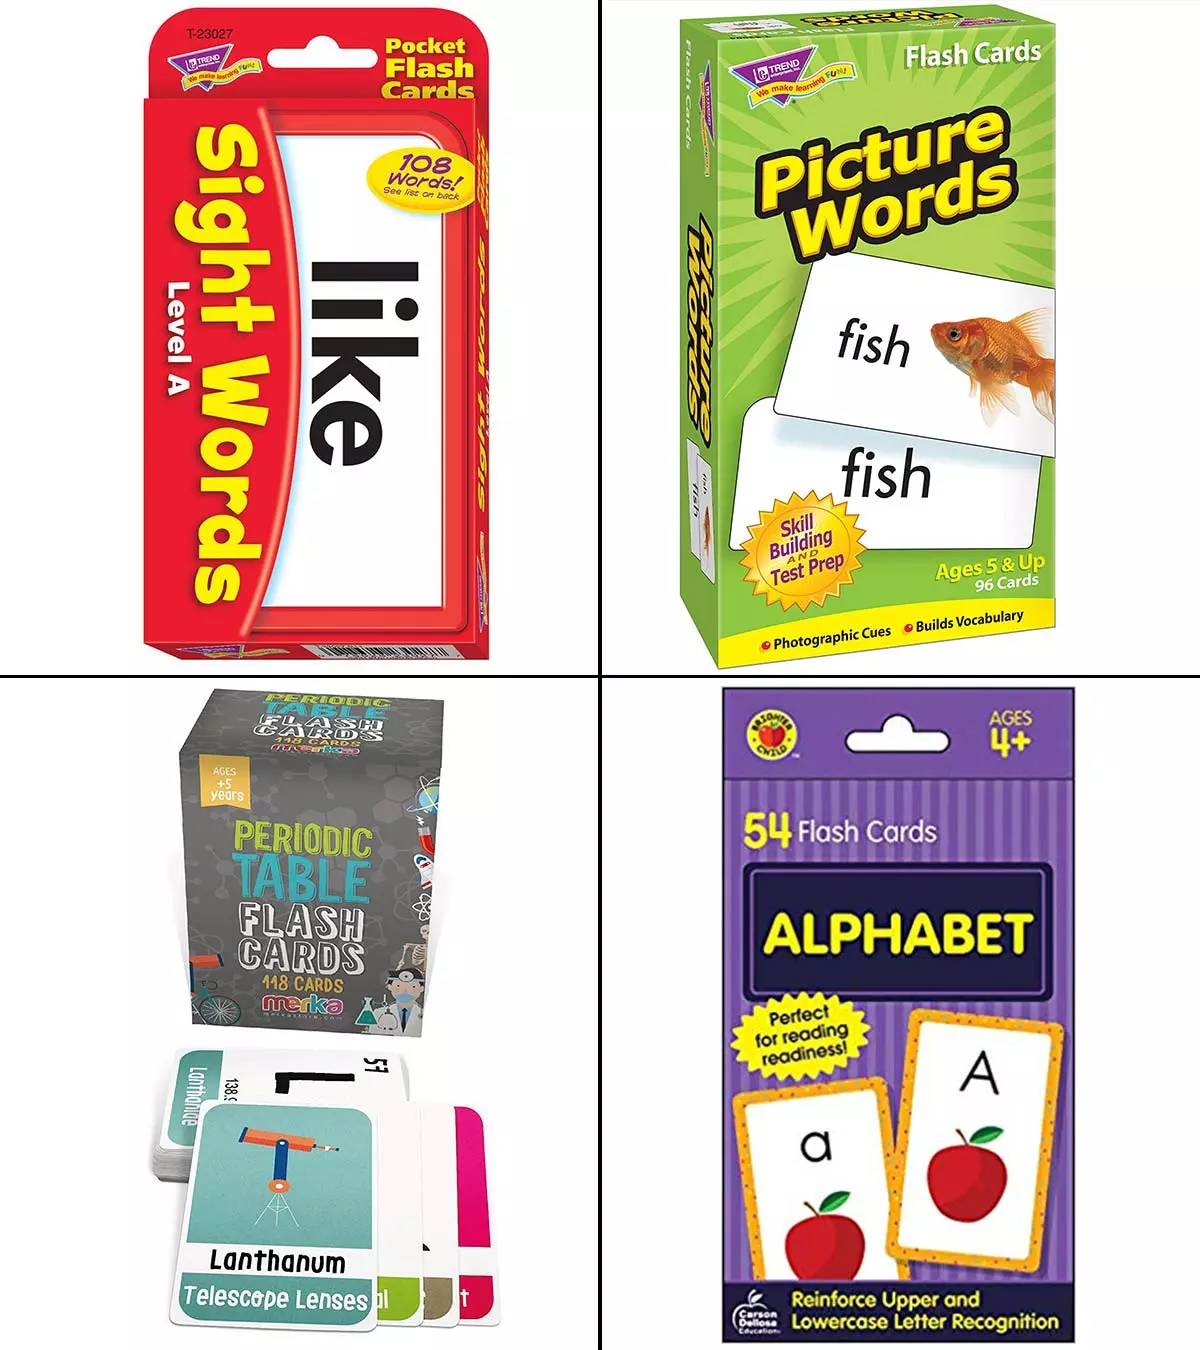 Flashcards with illustrations and images make learning fun and enjoyable.